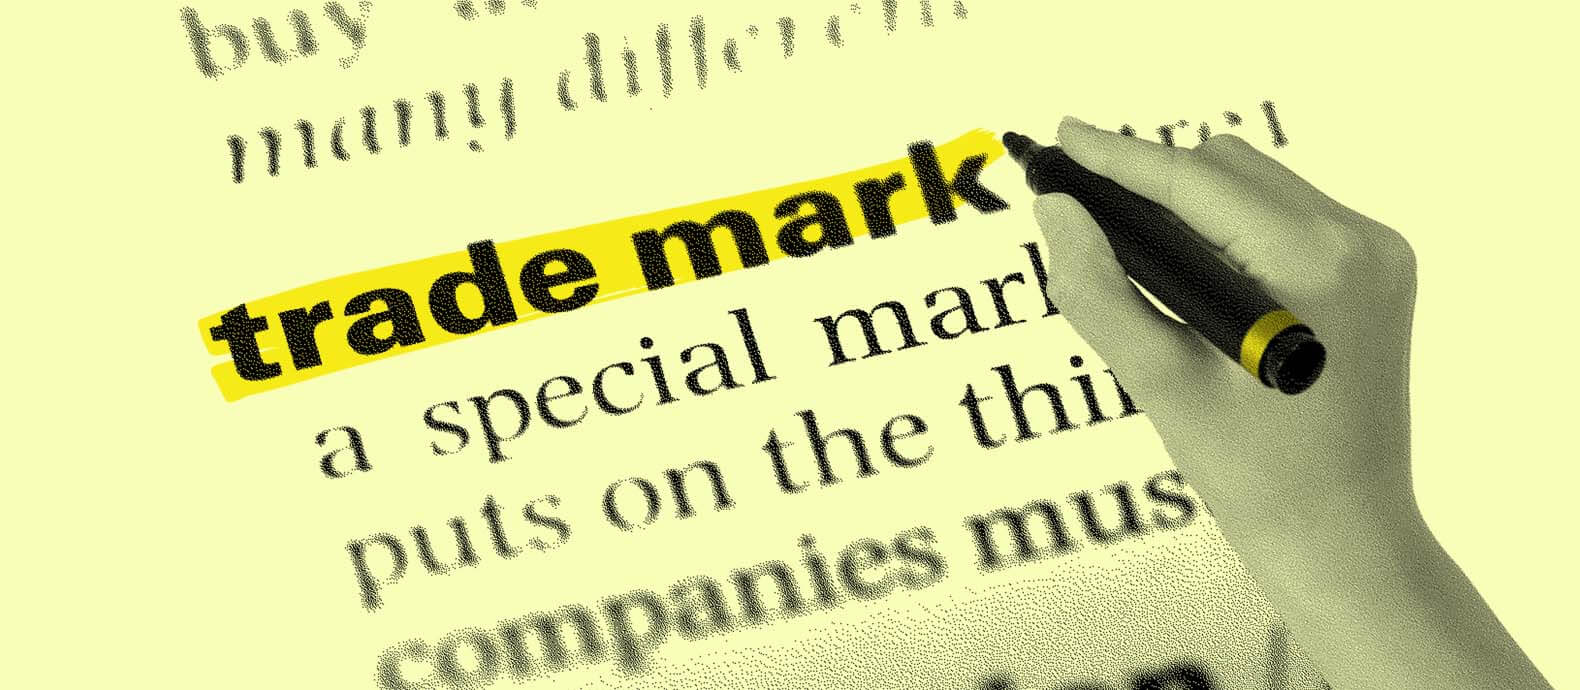 Online trademark monitoring: Everything you need to know